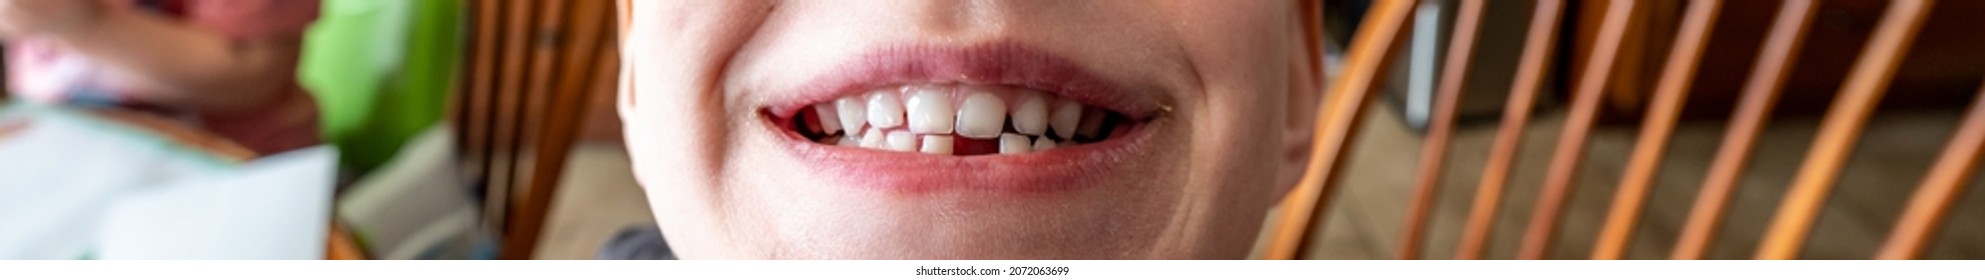 Lower Front Incisor Baby Tooth Gap Showing Gums And Socket